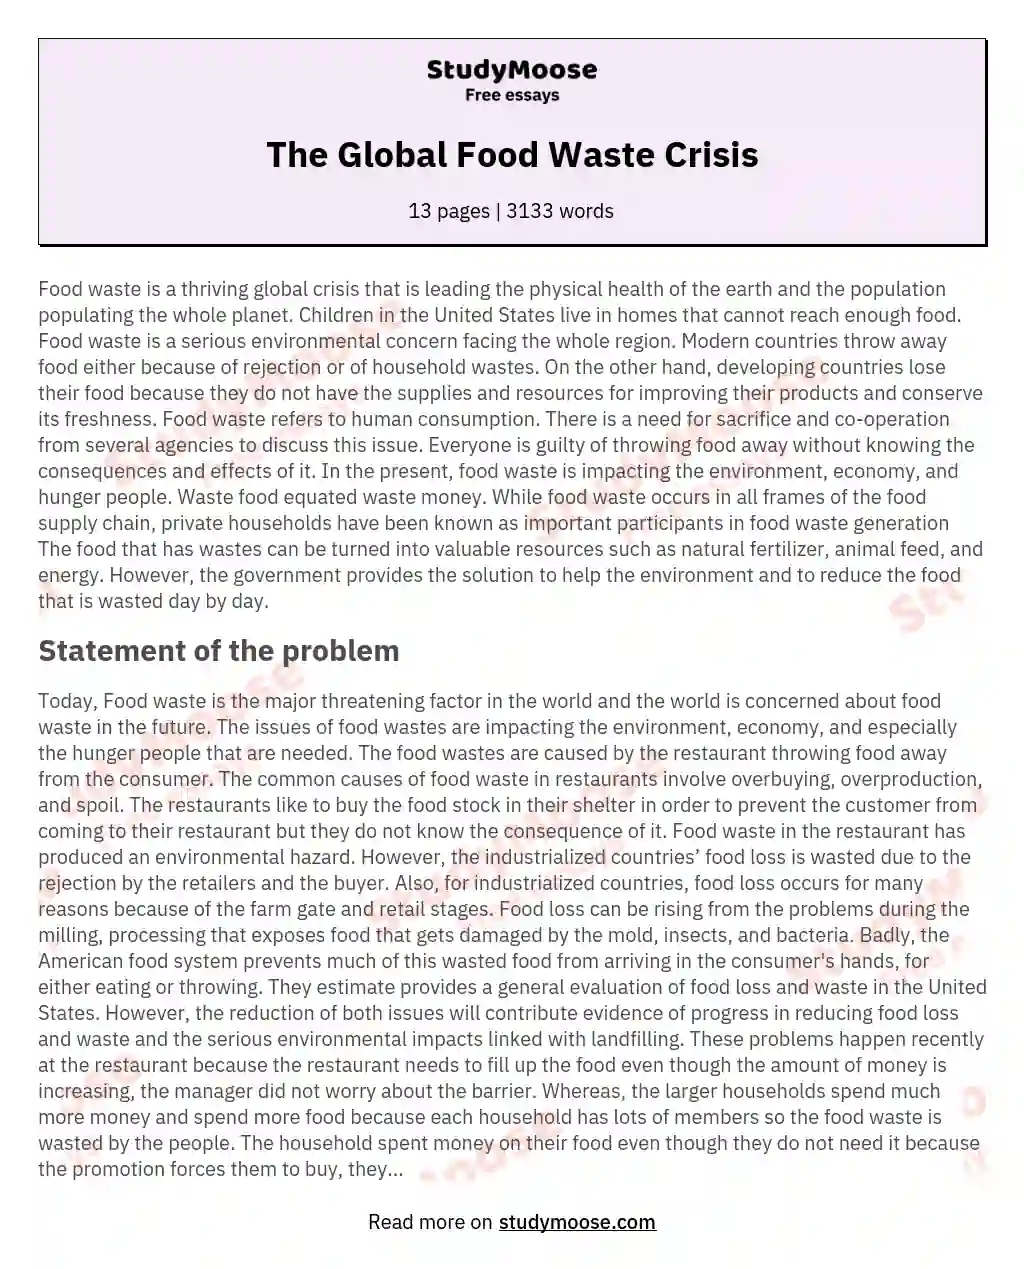 The Global Food Waste Crisis essay